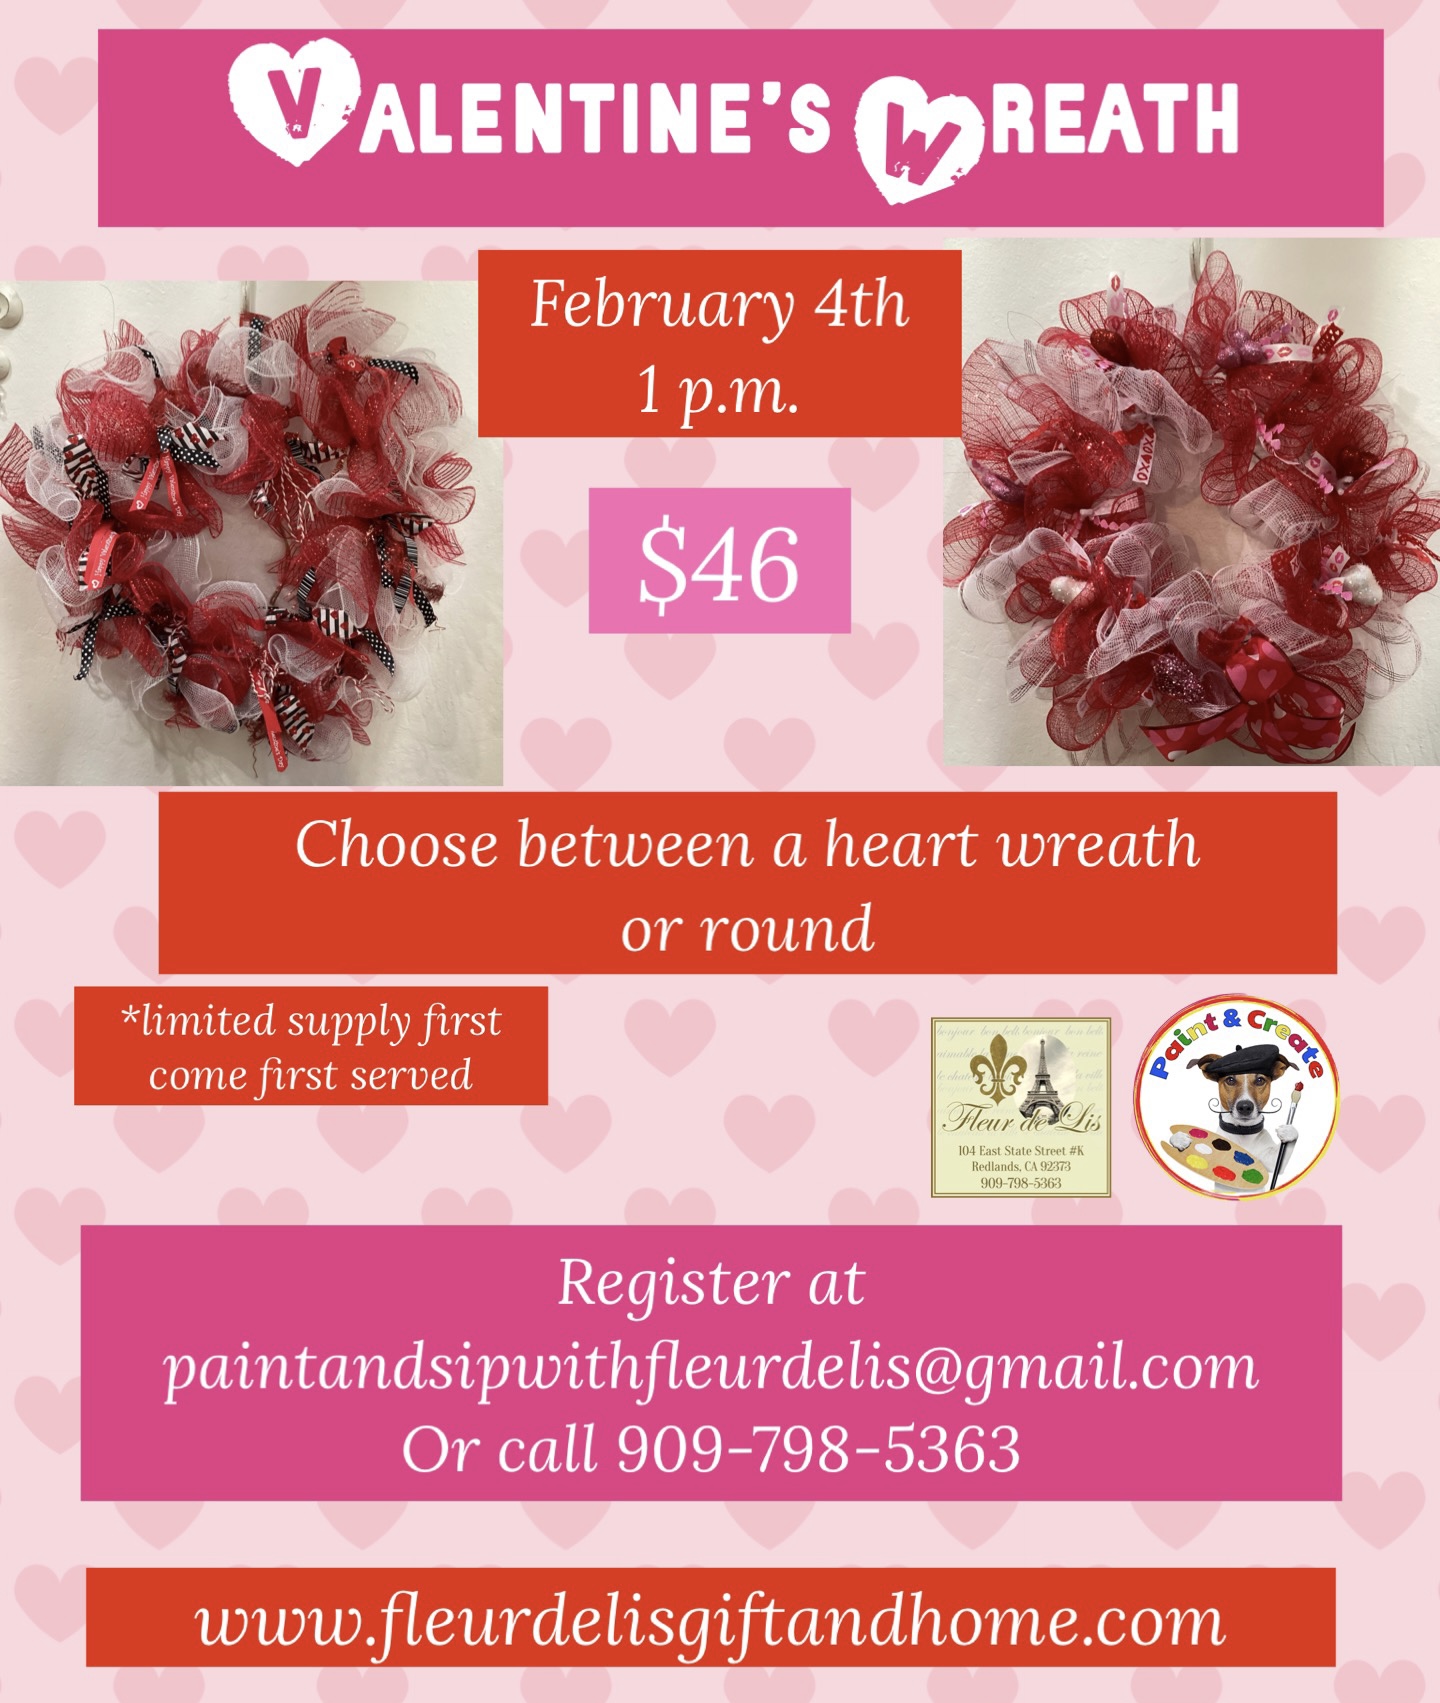 Learn to Make a Valentine’s Wreath on February 4th 1 p.m.